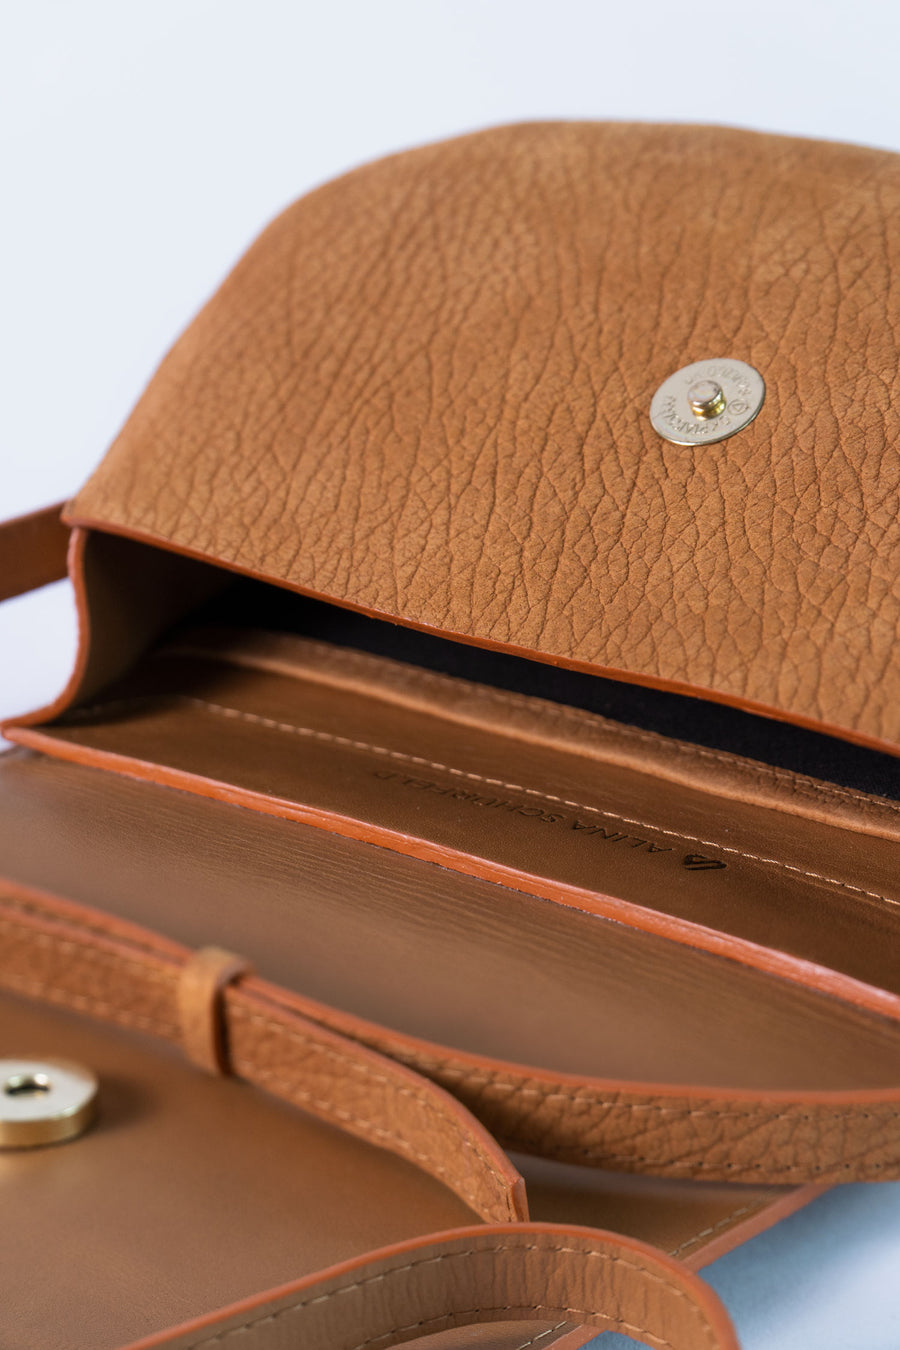 The Tisa bag - Made in Germany by Alina Schürfeld. Carefully crafted from luxury-grade, vegetable tanned leather.